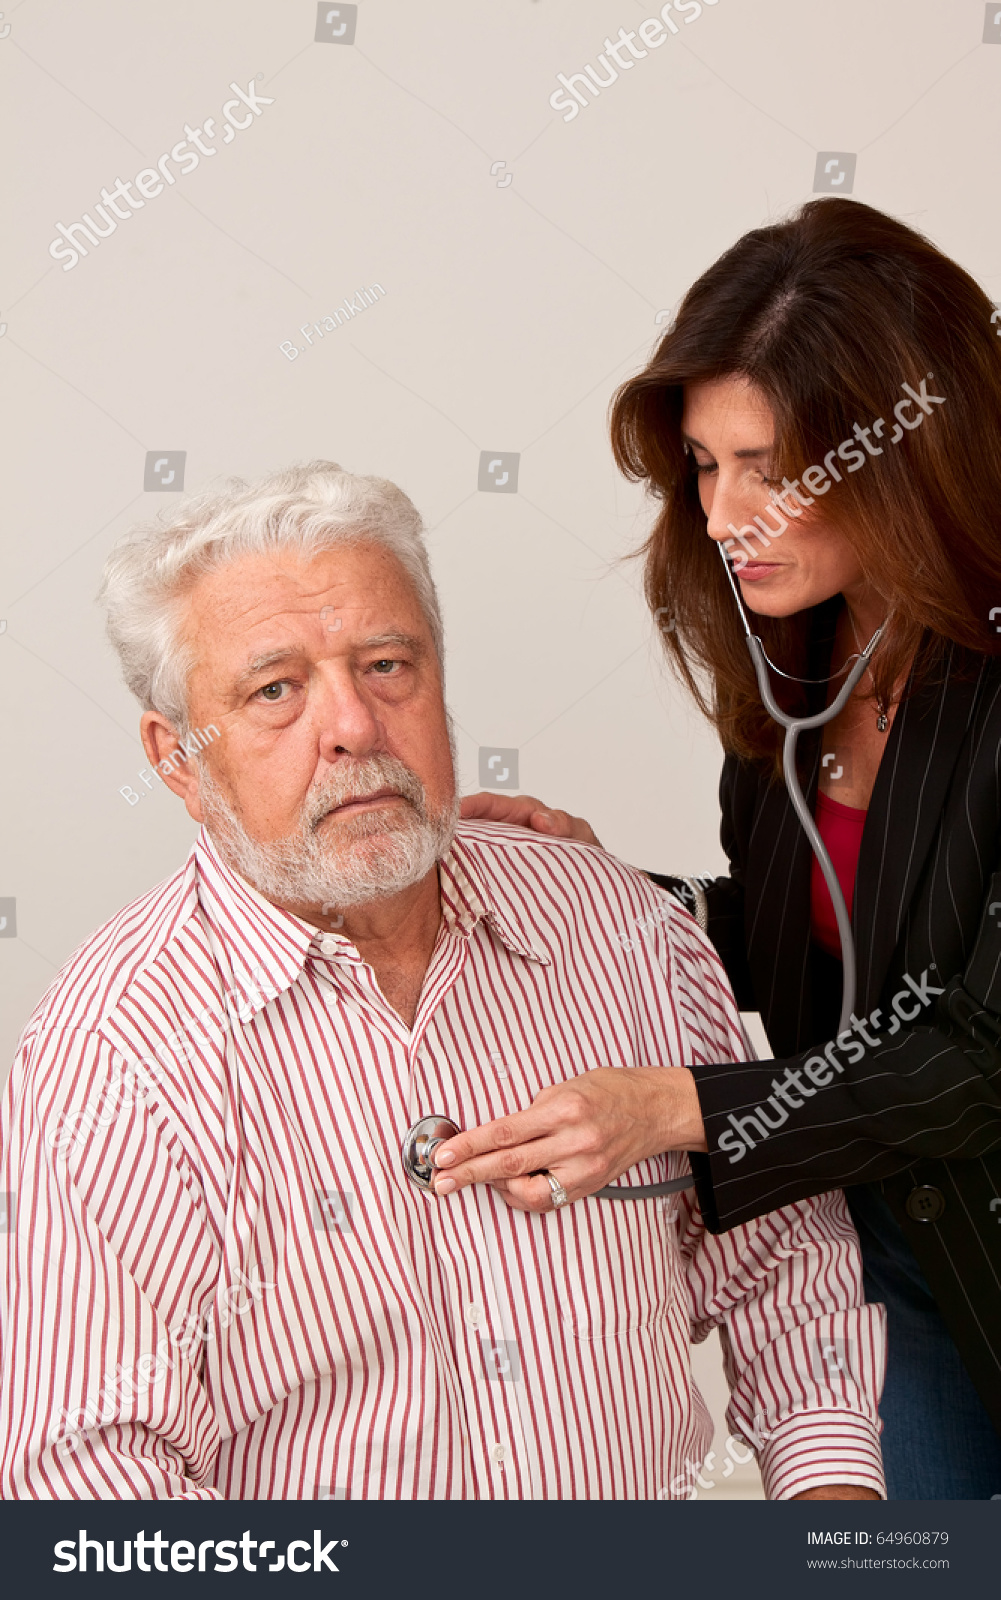 Female Doctor Give Senior Male Physical Stock Photo 64960879 - Shutterstock-6006